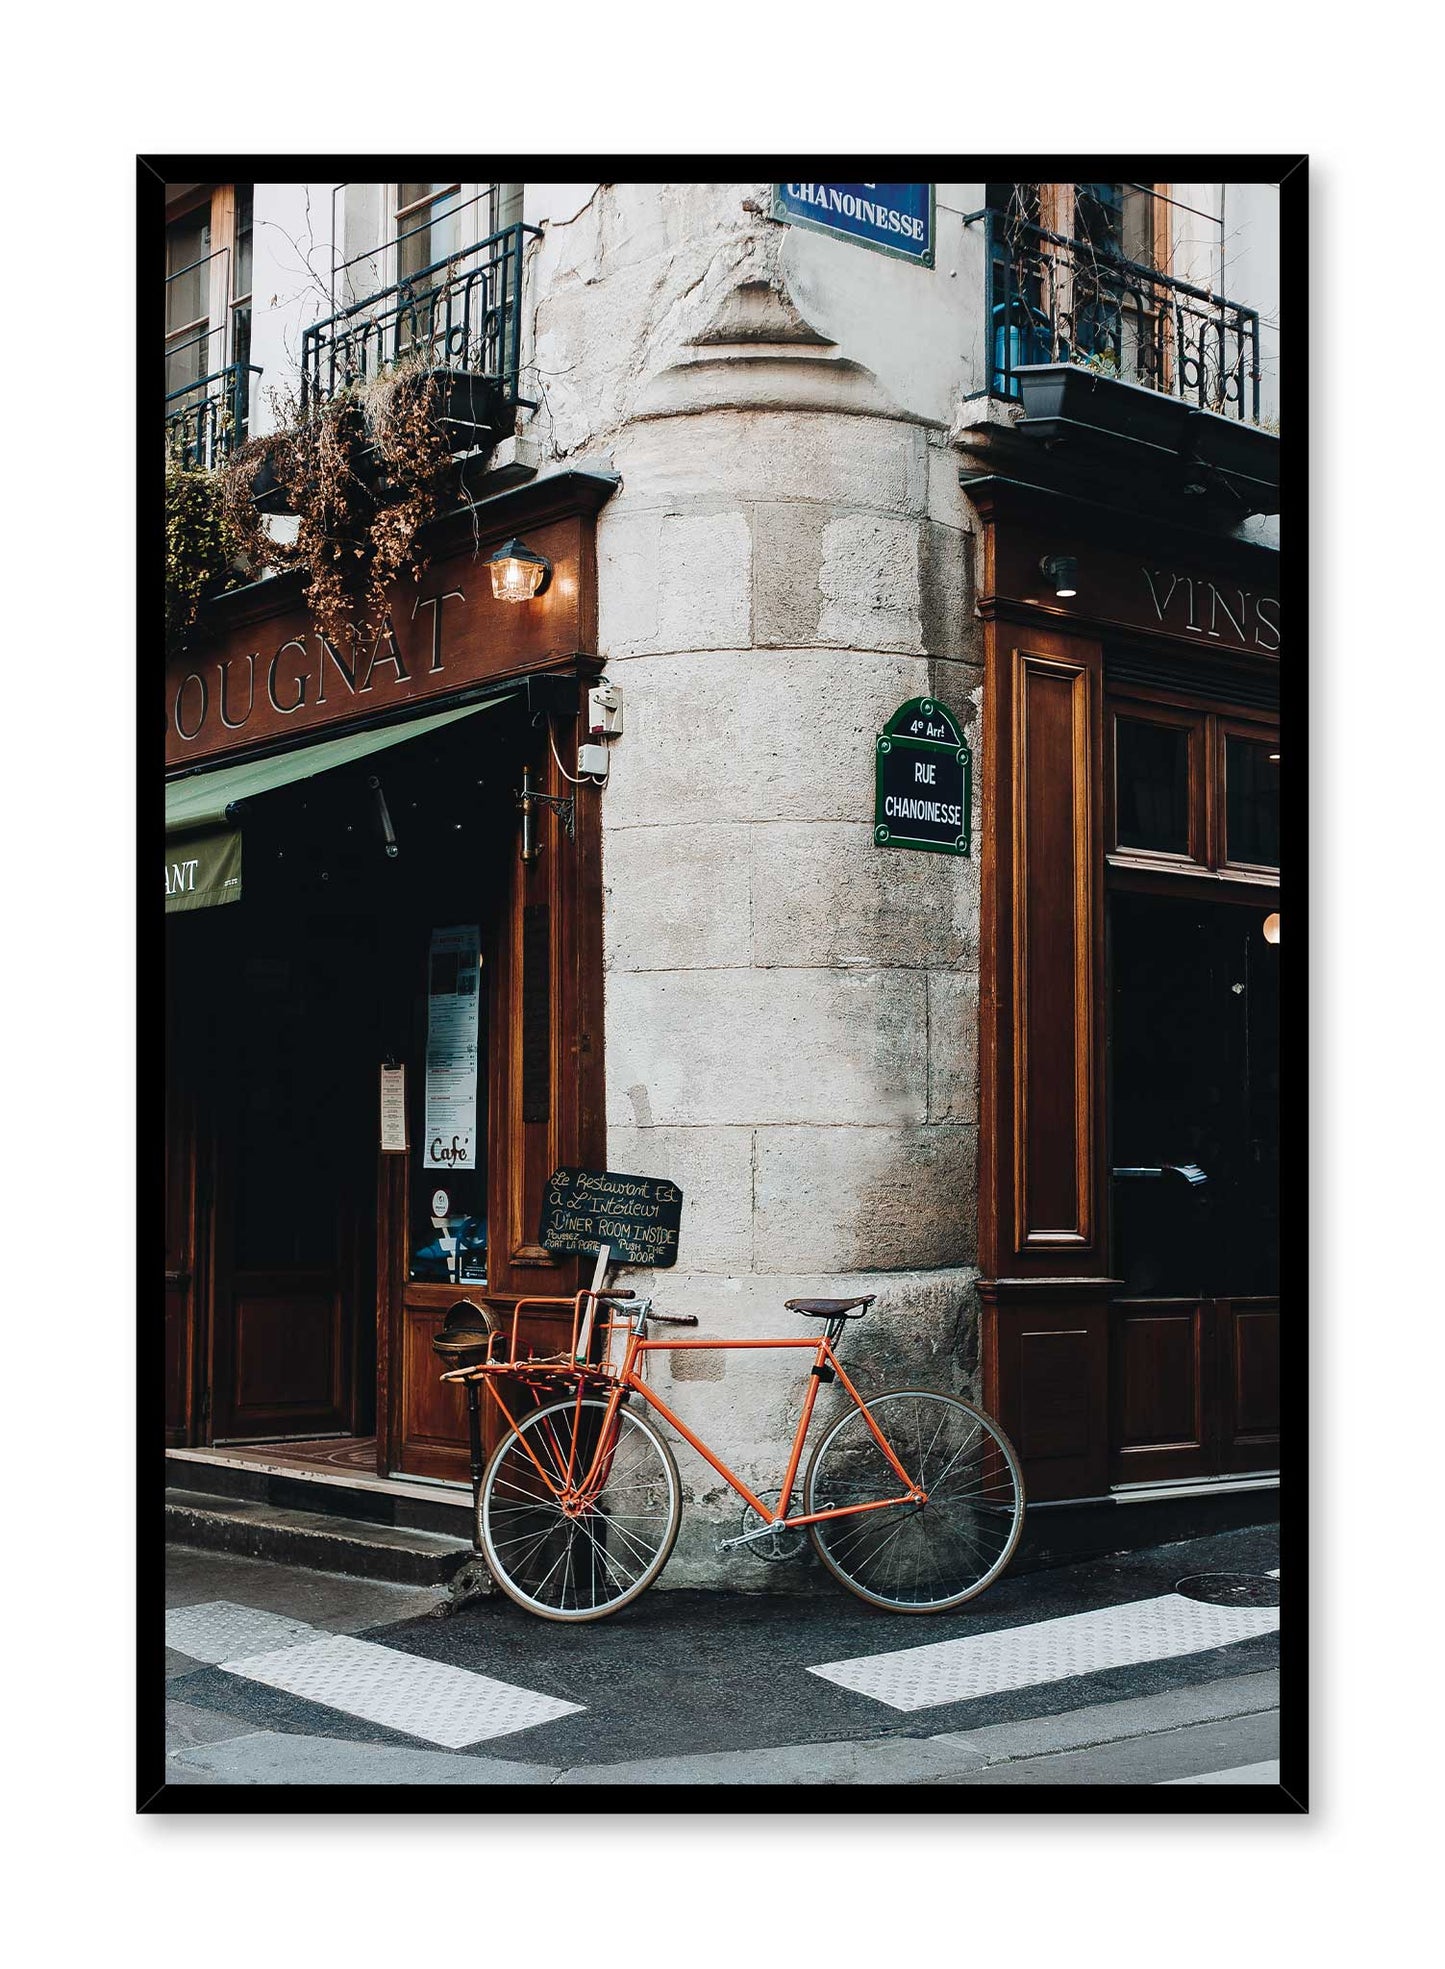 Photography of a bike in Paris, Poster | Oppositewall.com